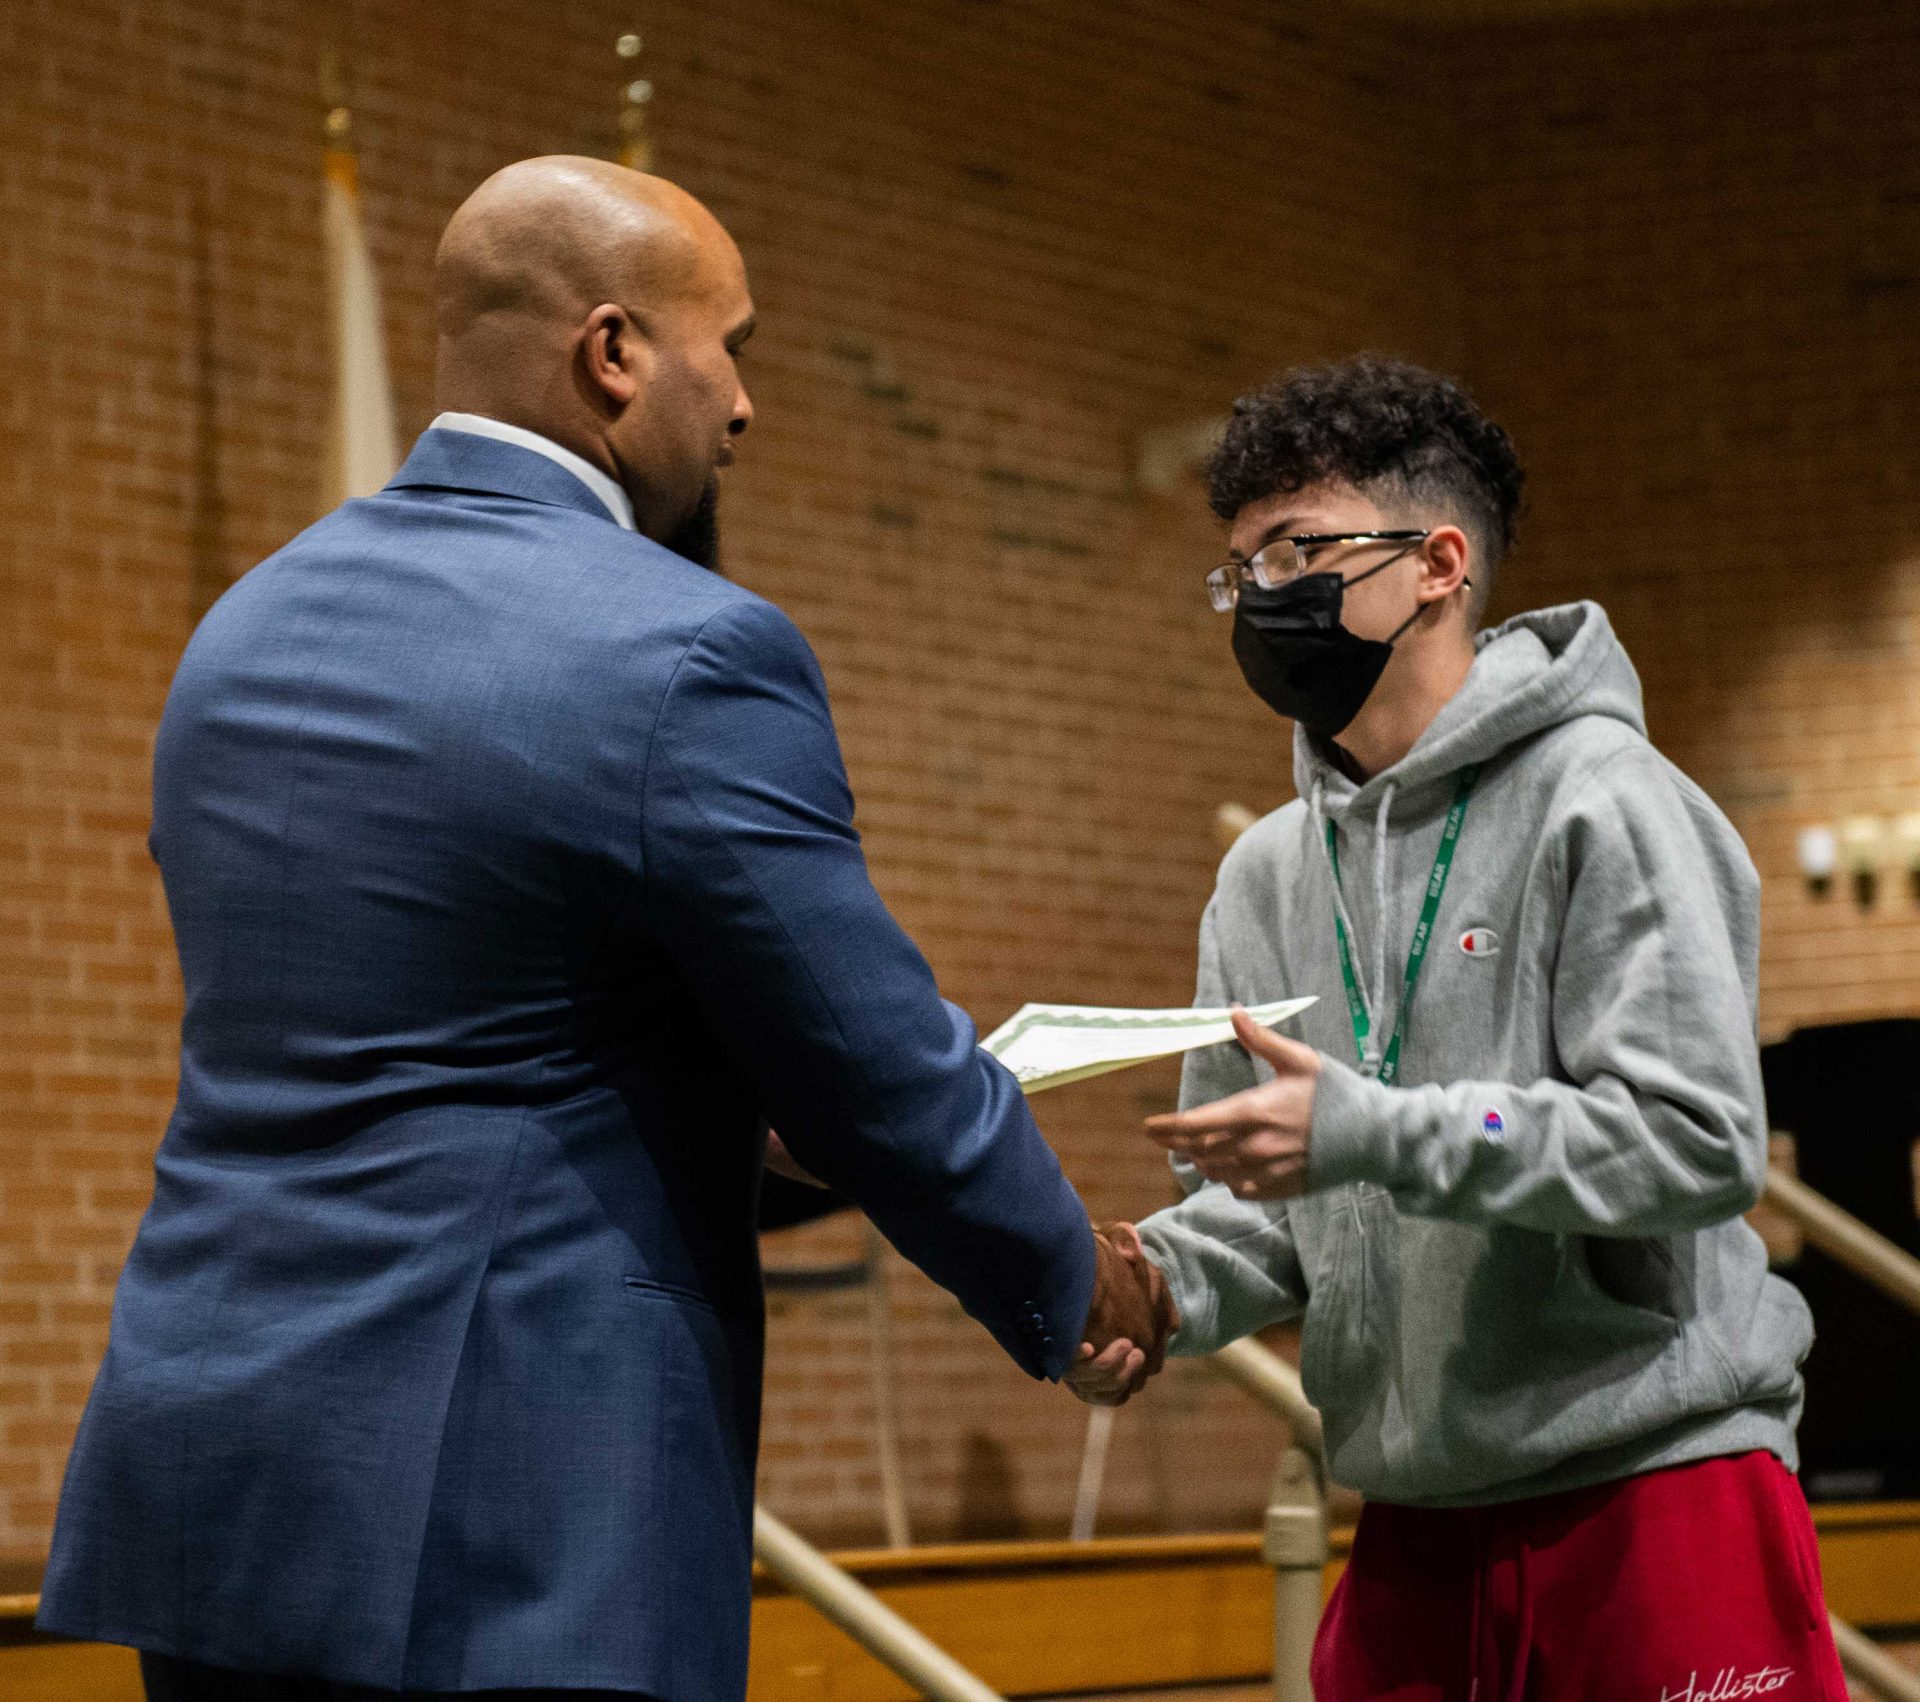 boy with gray sweater and mask shaking mr williams hand